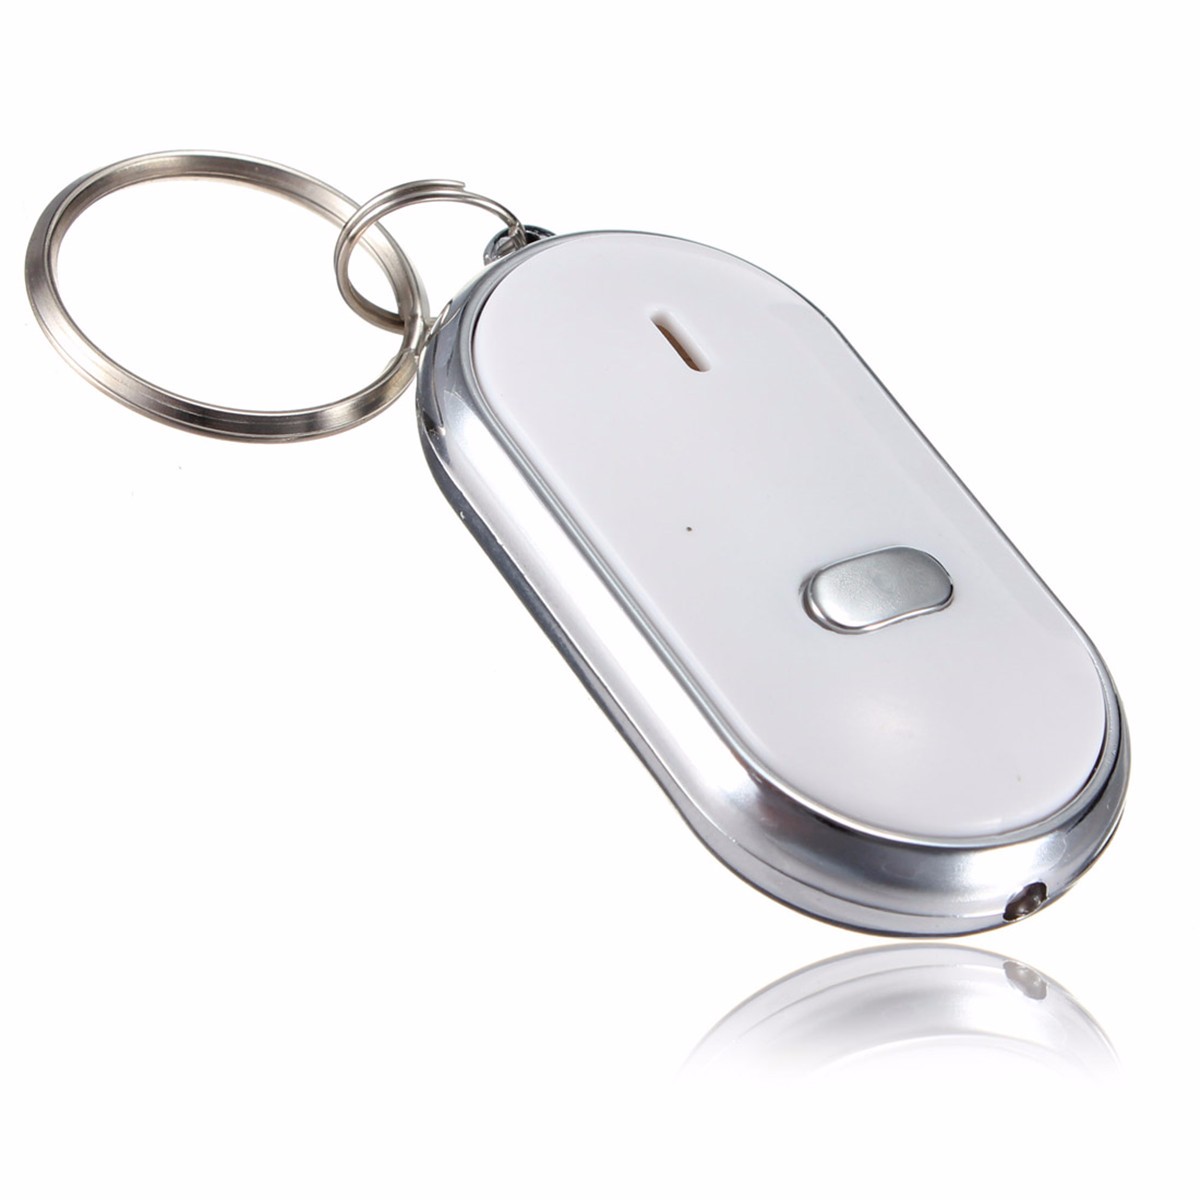 

10pcs Whistle Key Finder Keychain Sound LED With Whistle Claps